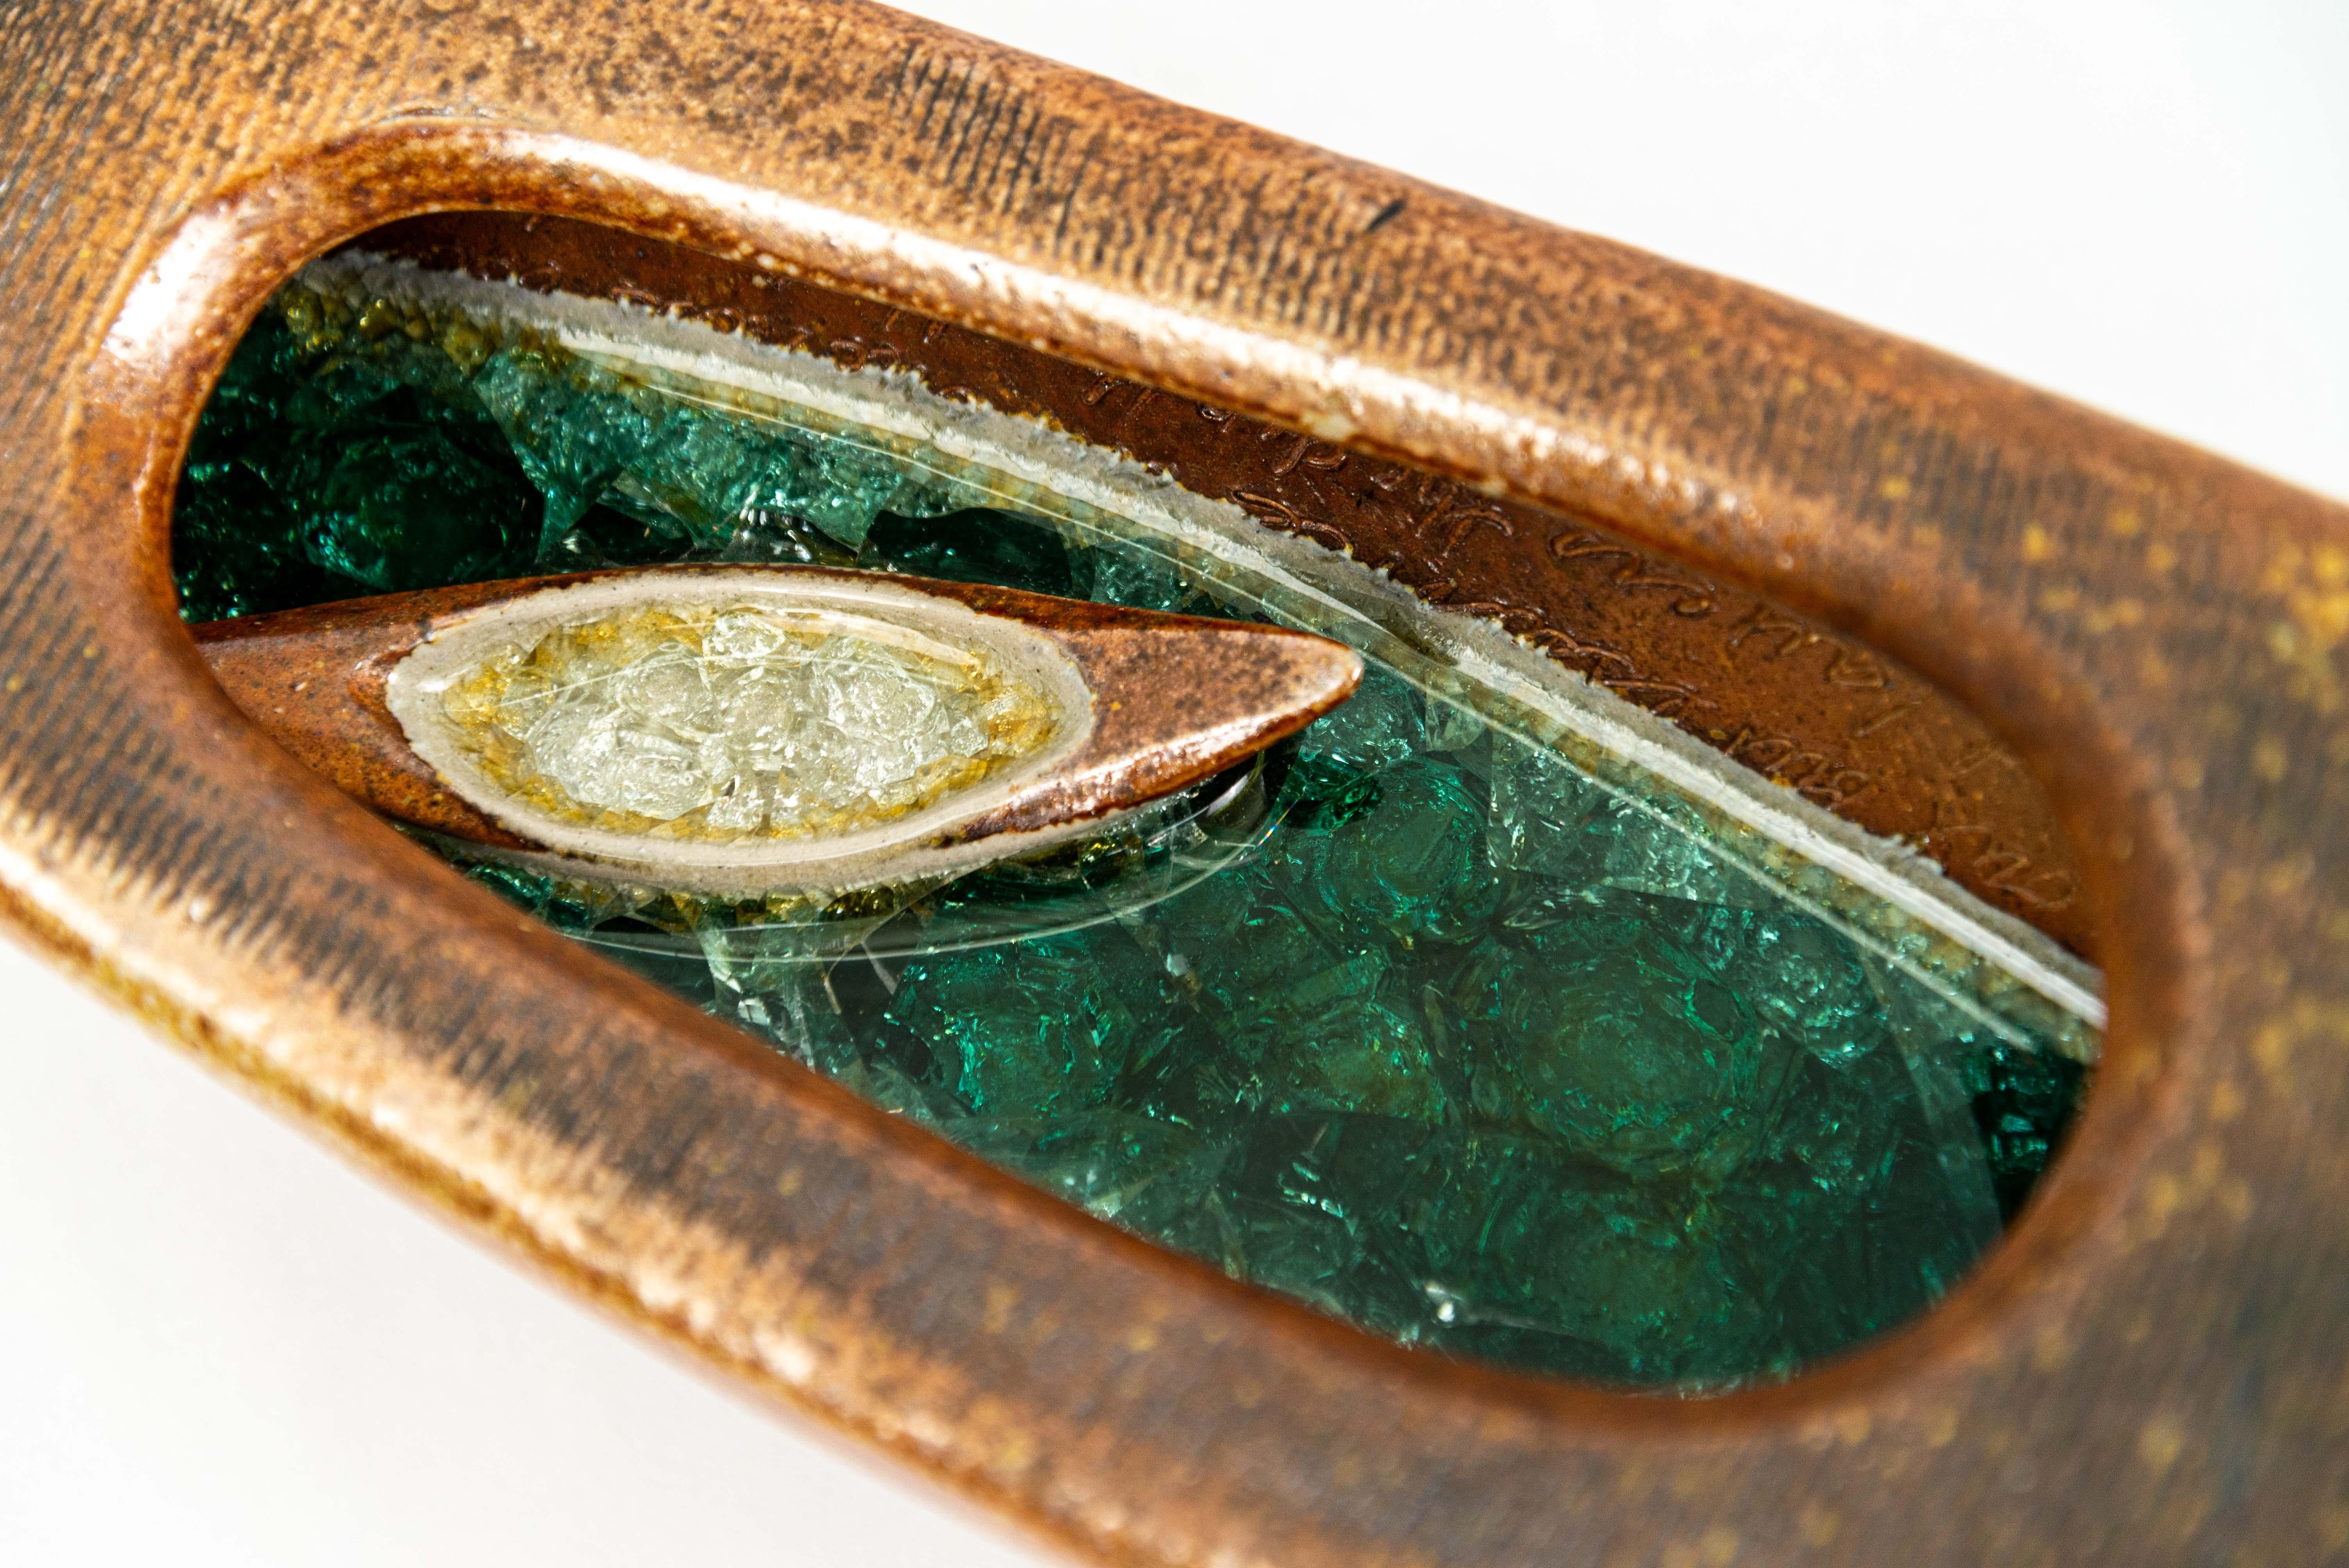 Possibility - detailed, inscribed, hand-built, vessel, glass, ceramic sculpture - Contemporary Sculpture by Heather Allen Hietala